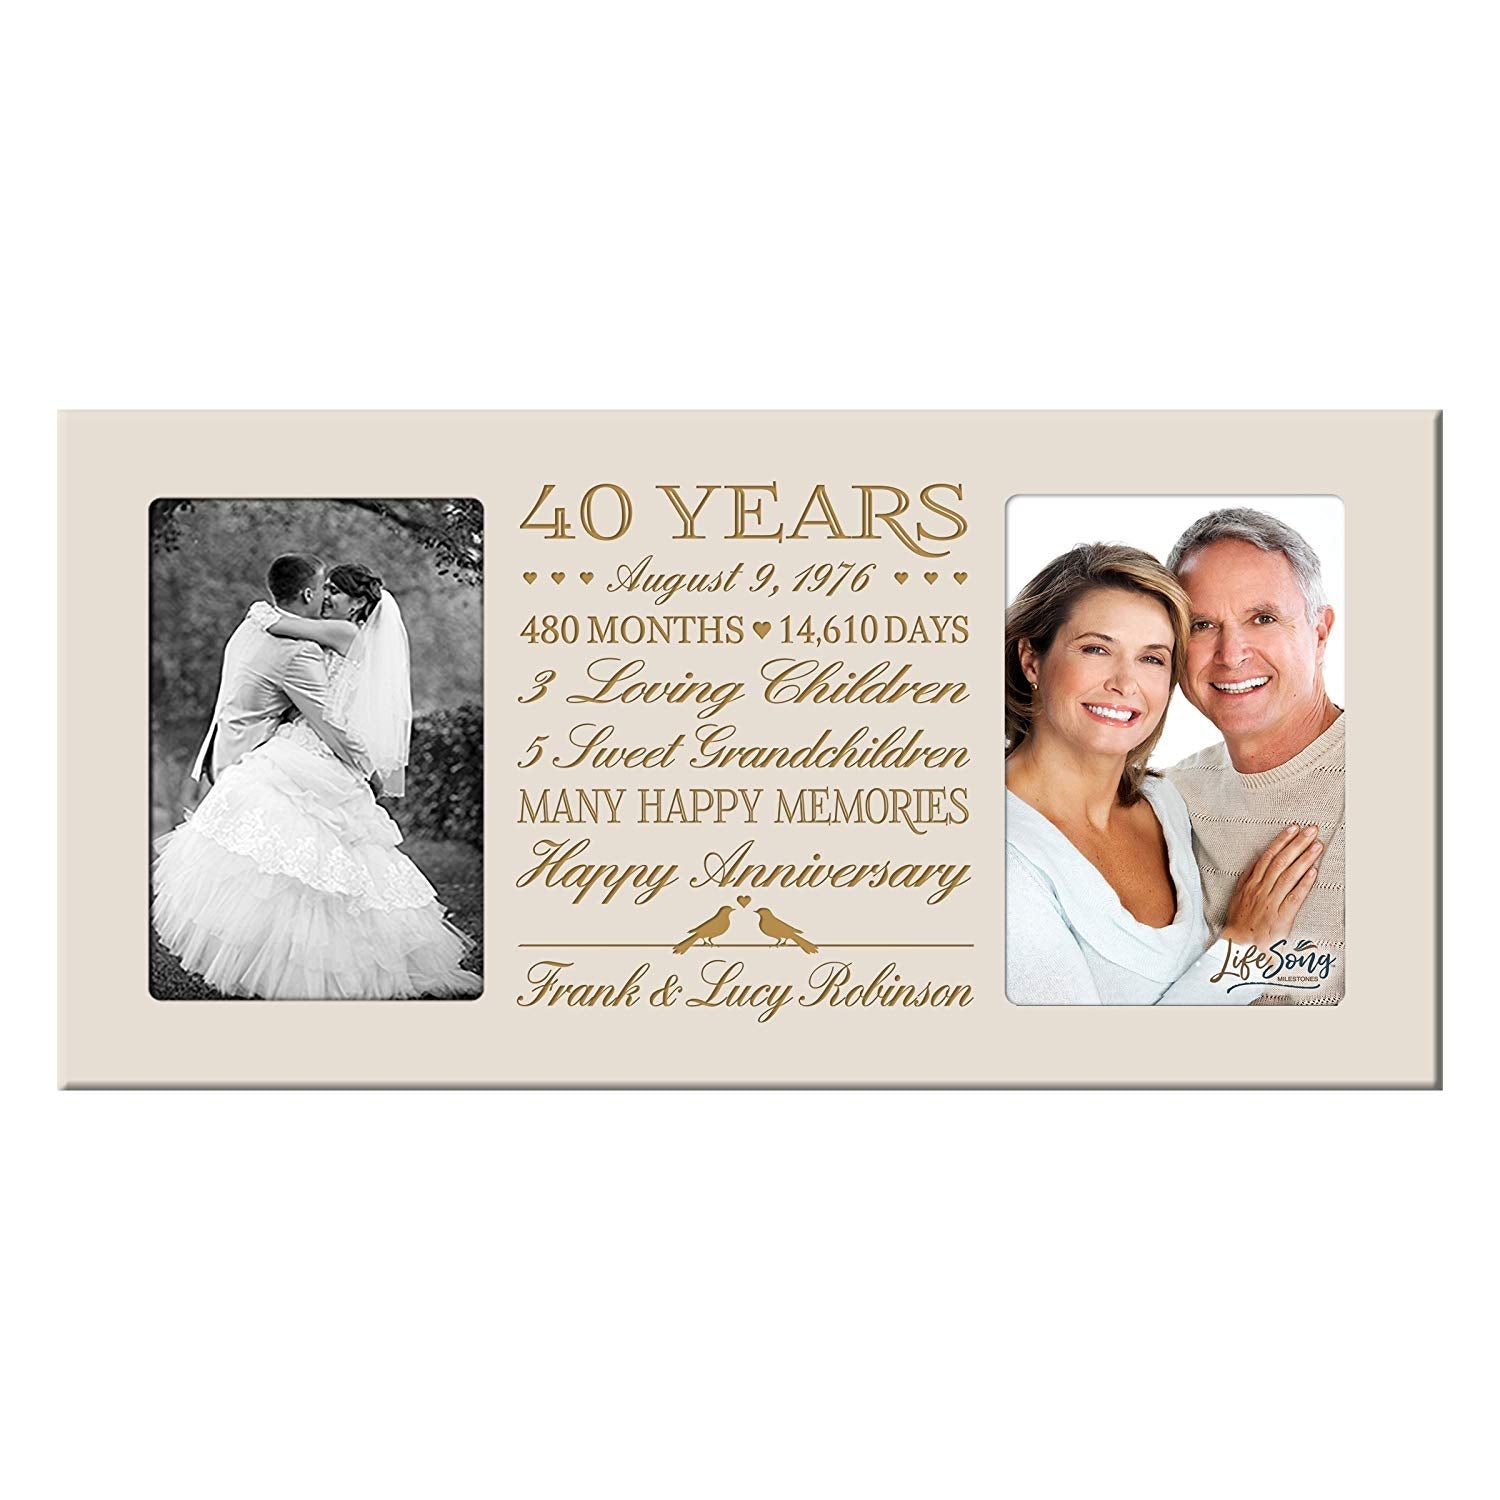 Lifesong Milestones Personalized Picture Frame for Couples 40th Wedding Anniversary Decorations